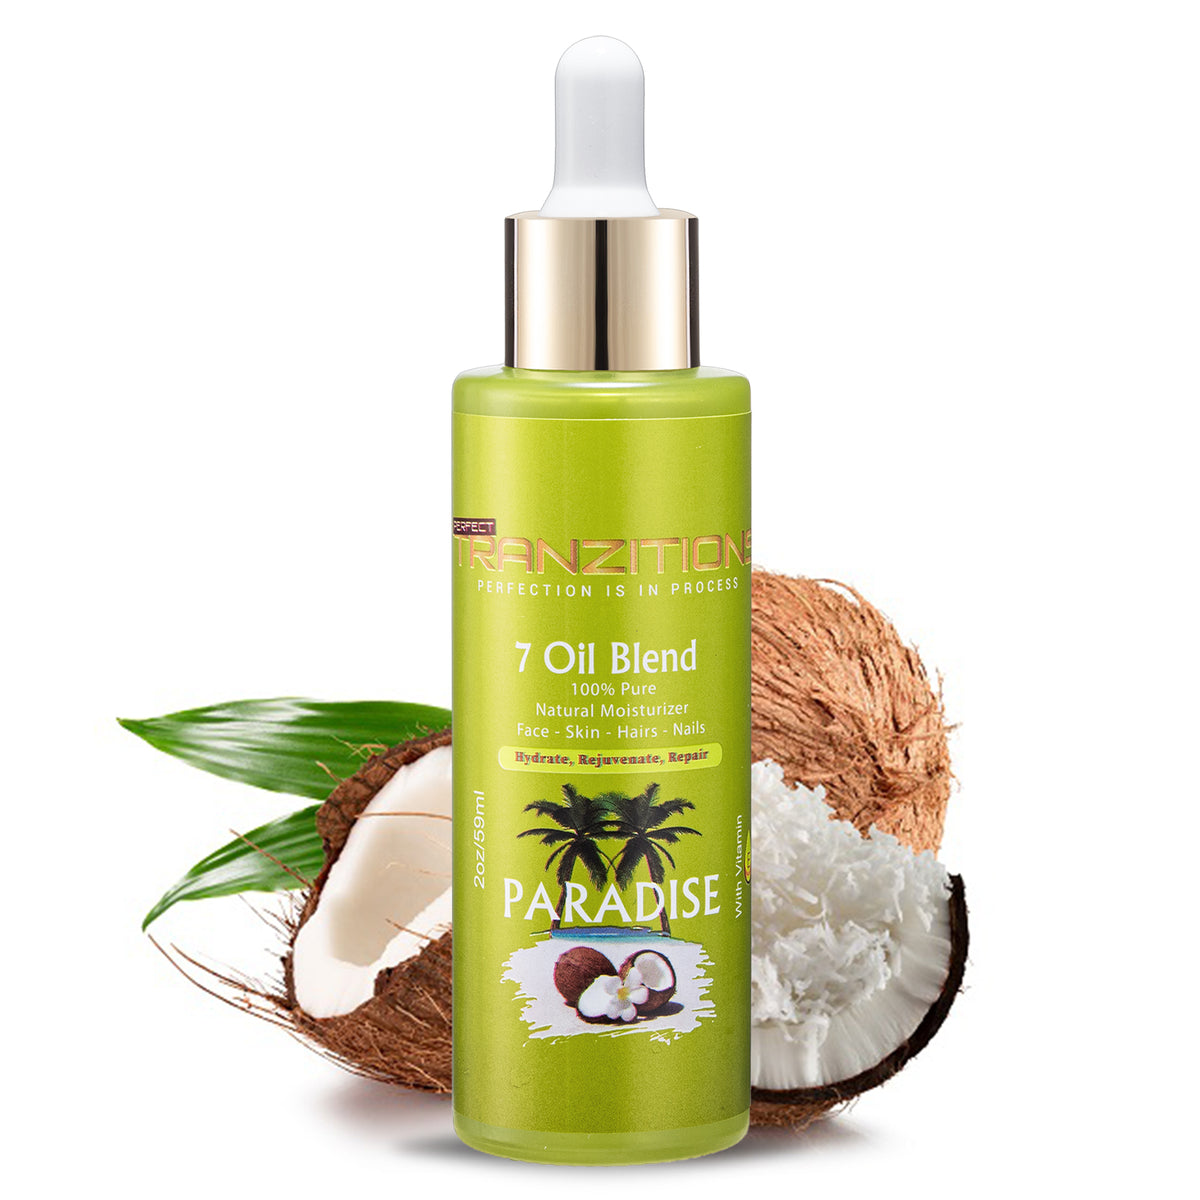 Paradise Conditioning Hair Oil For Dry Scalp Cold Pressed Coconut,Apricot,Sweet Almond & Castor Oil With Vitamin E Quick-Absorbing Hydrating Body Oils For Women with Dry Skin All Natural Oil For Hair